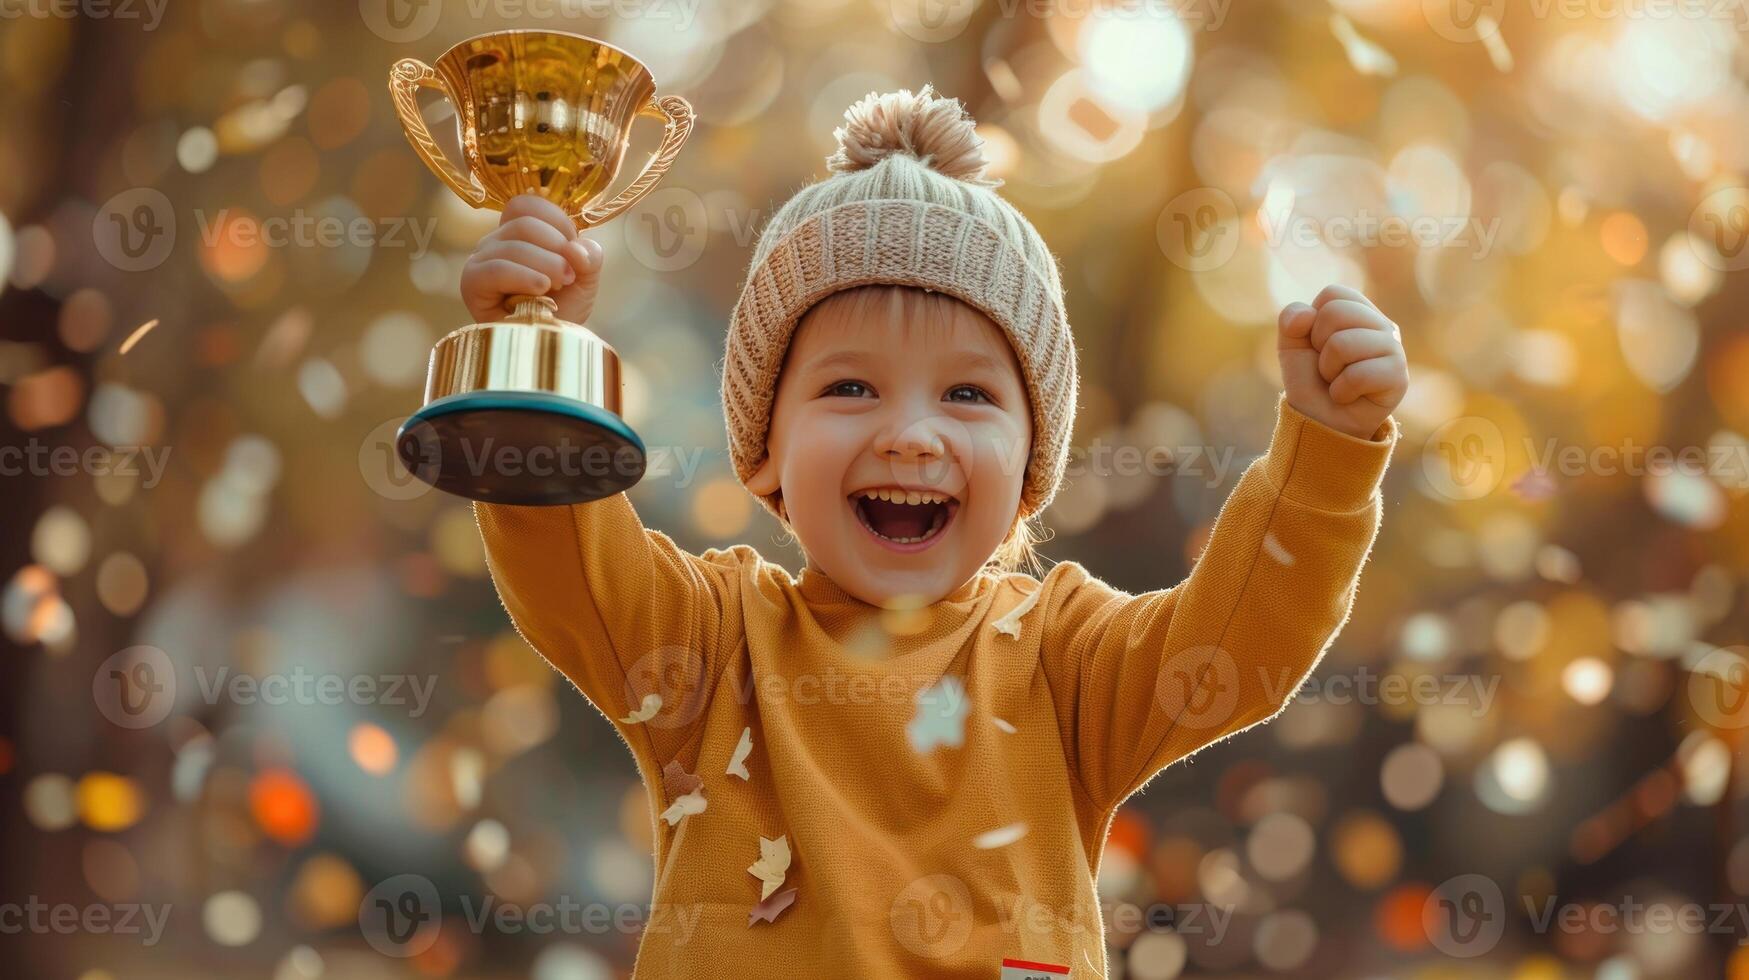 A young child is holding a trophy and smiling photo